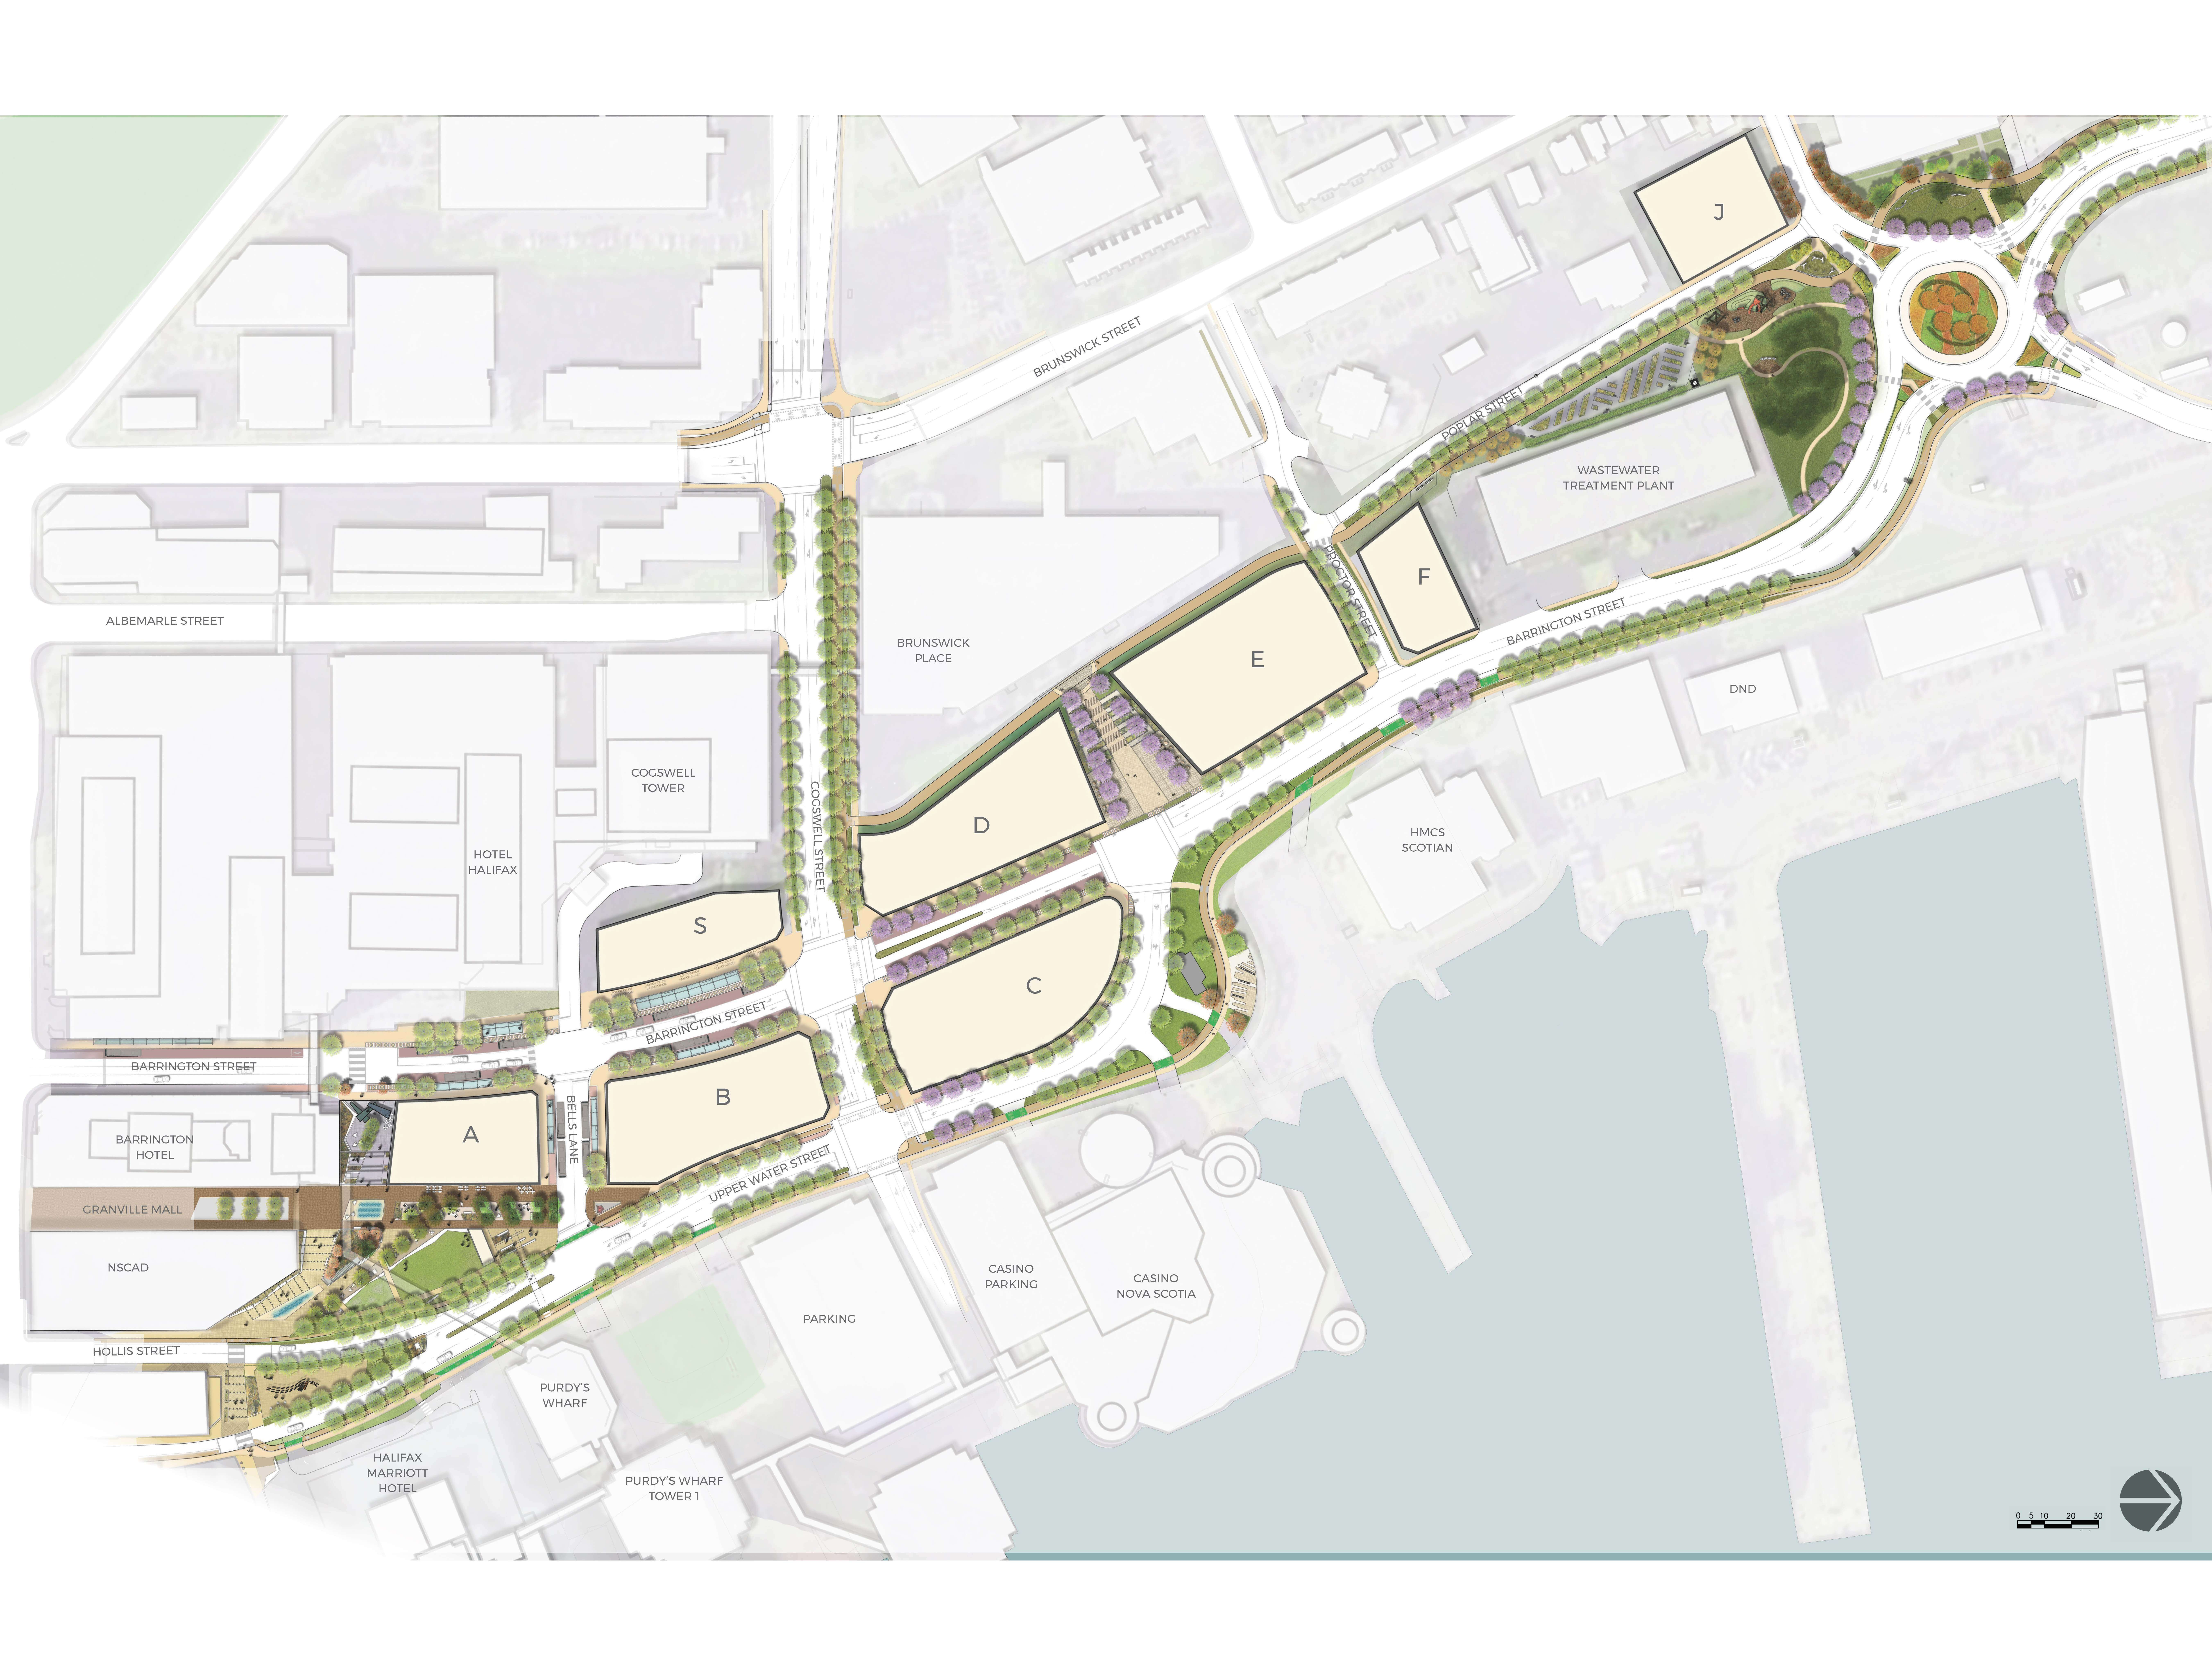 Cogswell District 90 per cent design - master plan